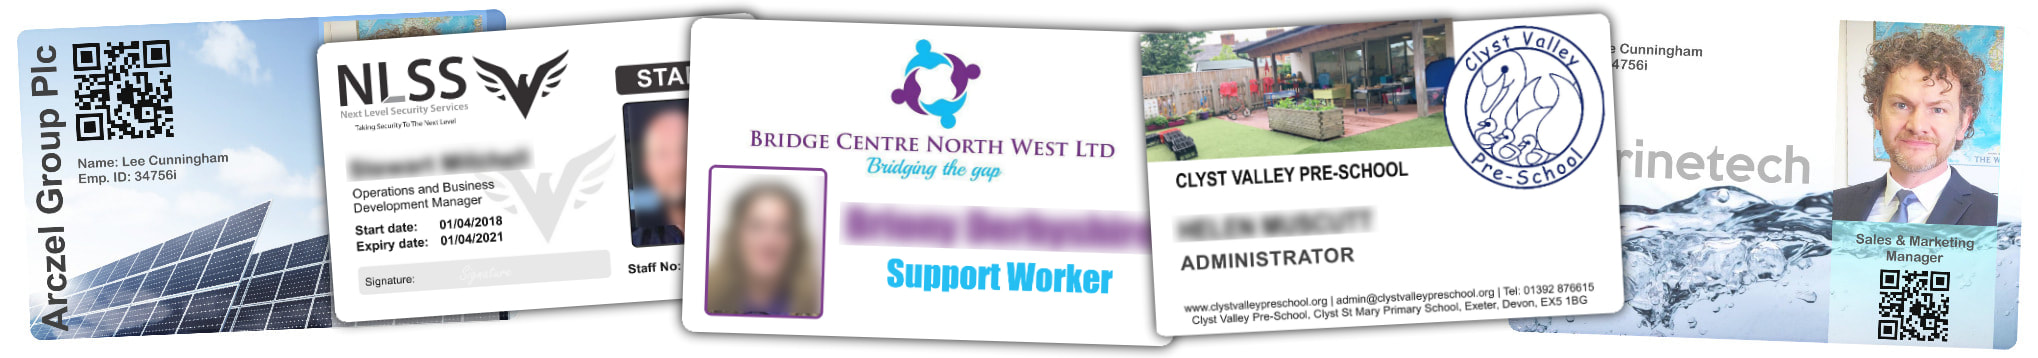 Accrington examples of staff photo ID cards | samples of employee Identity card printing | Workers ID cards printed in 